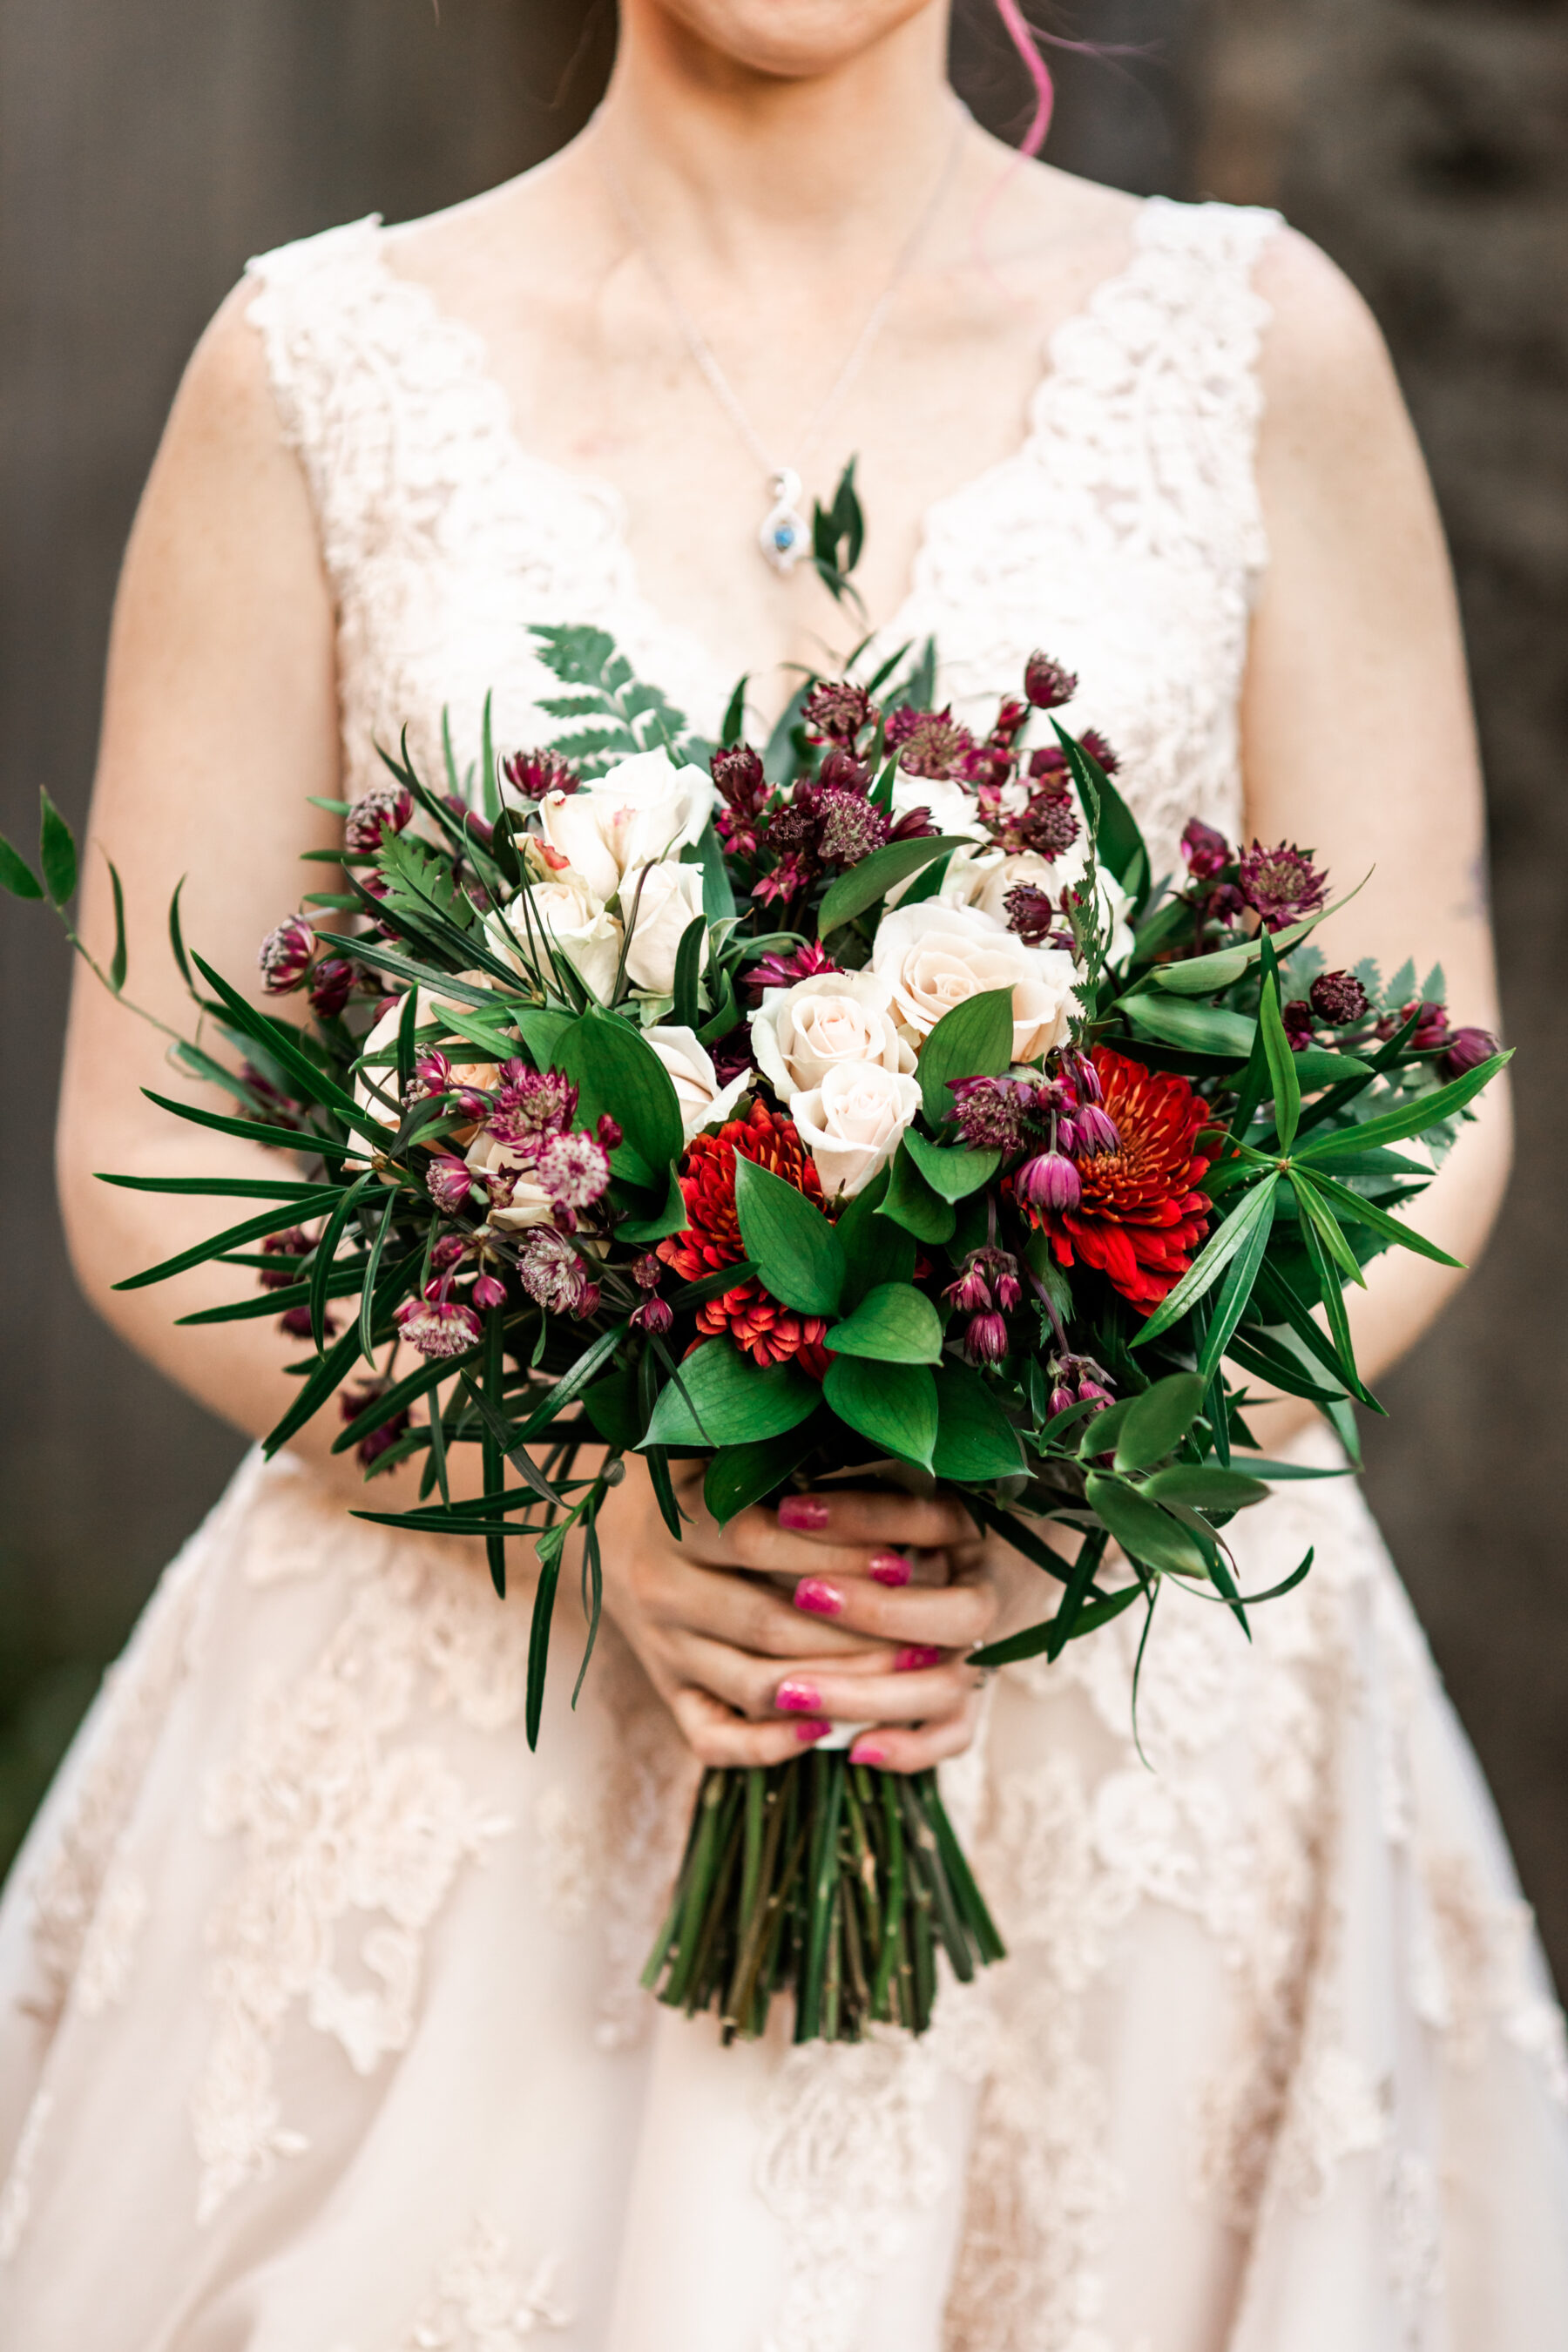 Red and white wintery wedding bouquet: Nashville Wish Upon a Wedding captured by Nyk + Cali Photography featured on Nashville Bride Guide